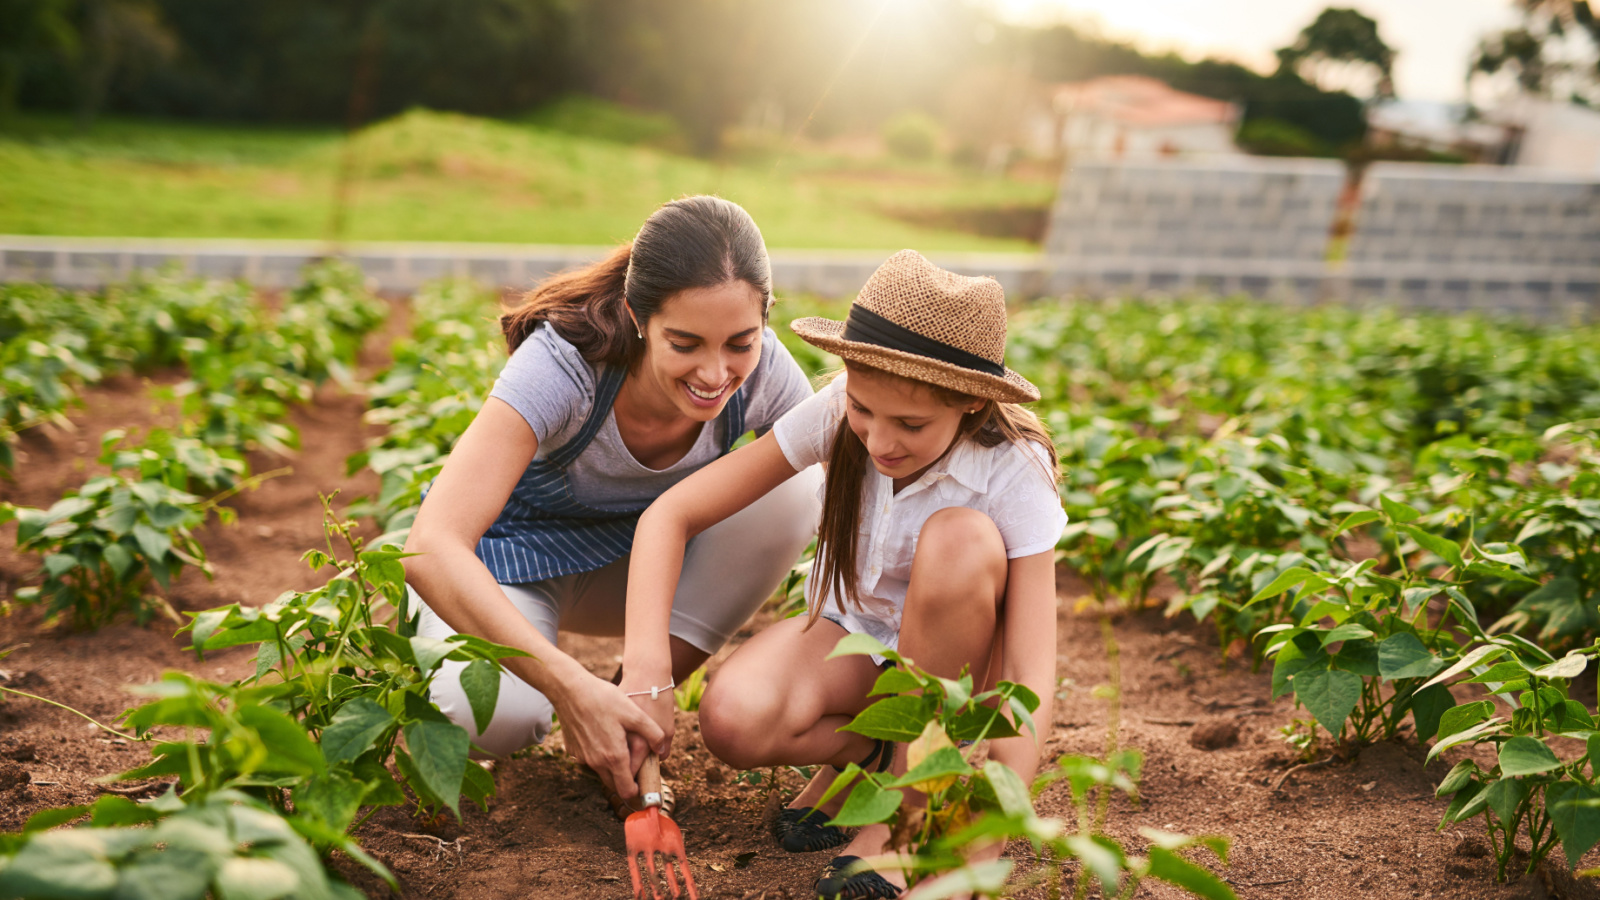 image credit: PeopleImages.com Yuri A/Shutterstock <p><span>Starting a small vegetable garden can yield big savings on your grocery bill. Even a few pots of herbs or tomatoes can make a difference. Gardening is not only economical but also therapeutic and rewarding. Plus, you can’t beat the taste of home-grown produce.</span></p>